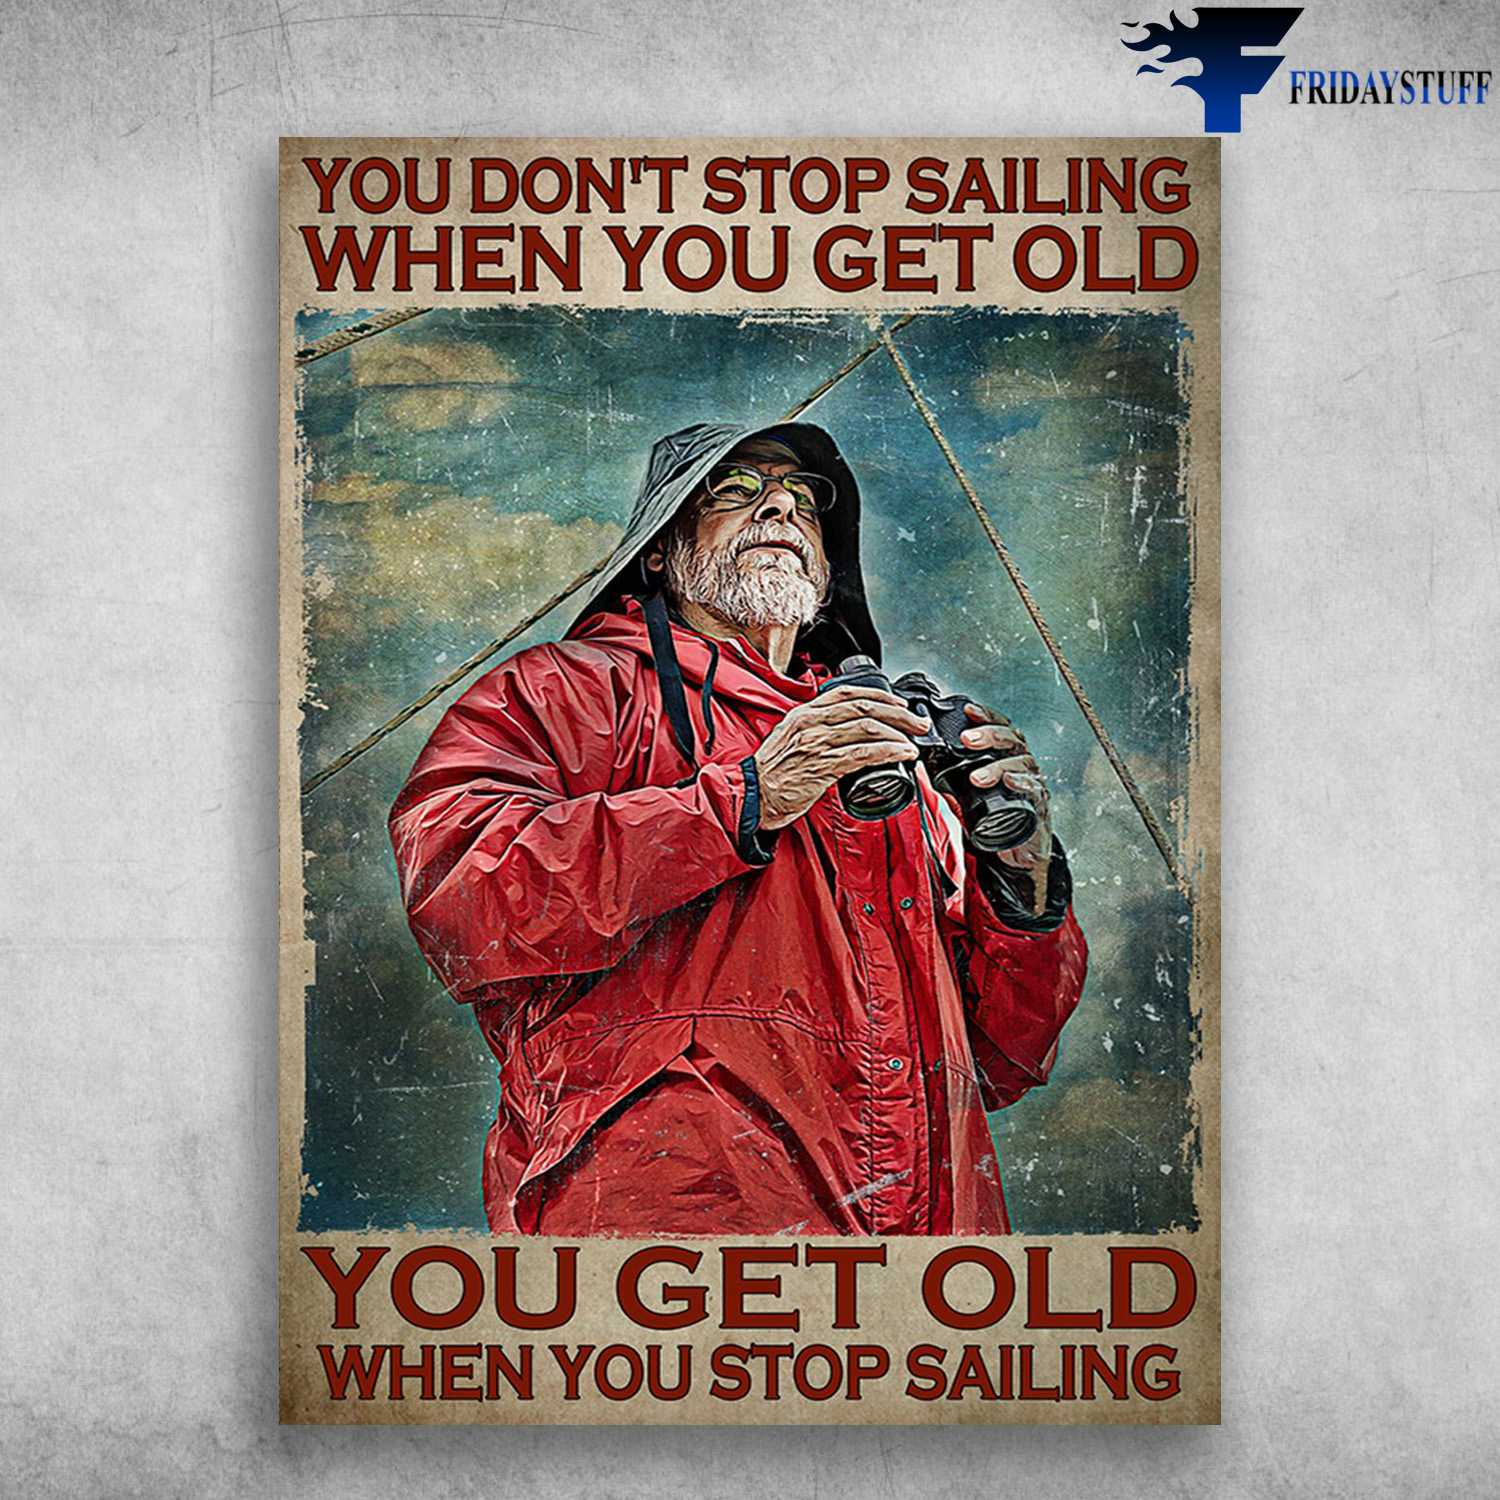 Old Sailor, Sailor In Storm - You Don't Stop Sailing When You Get Old, You Get Old When You Stop Sailing